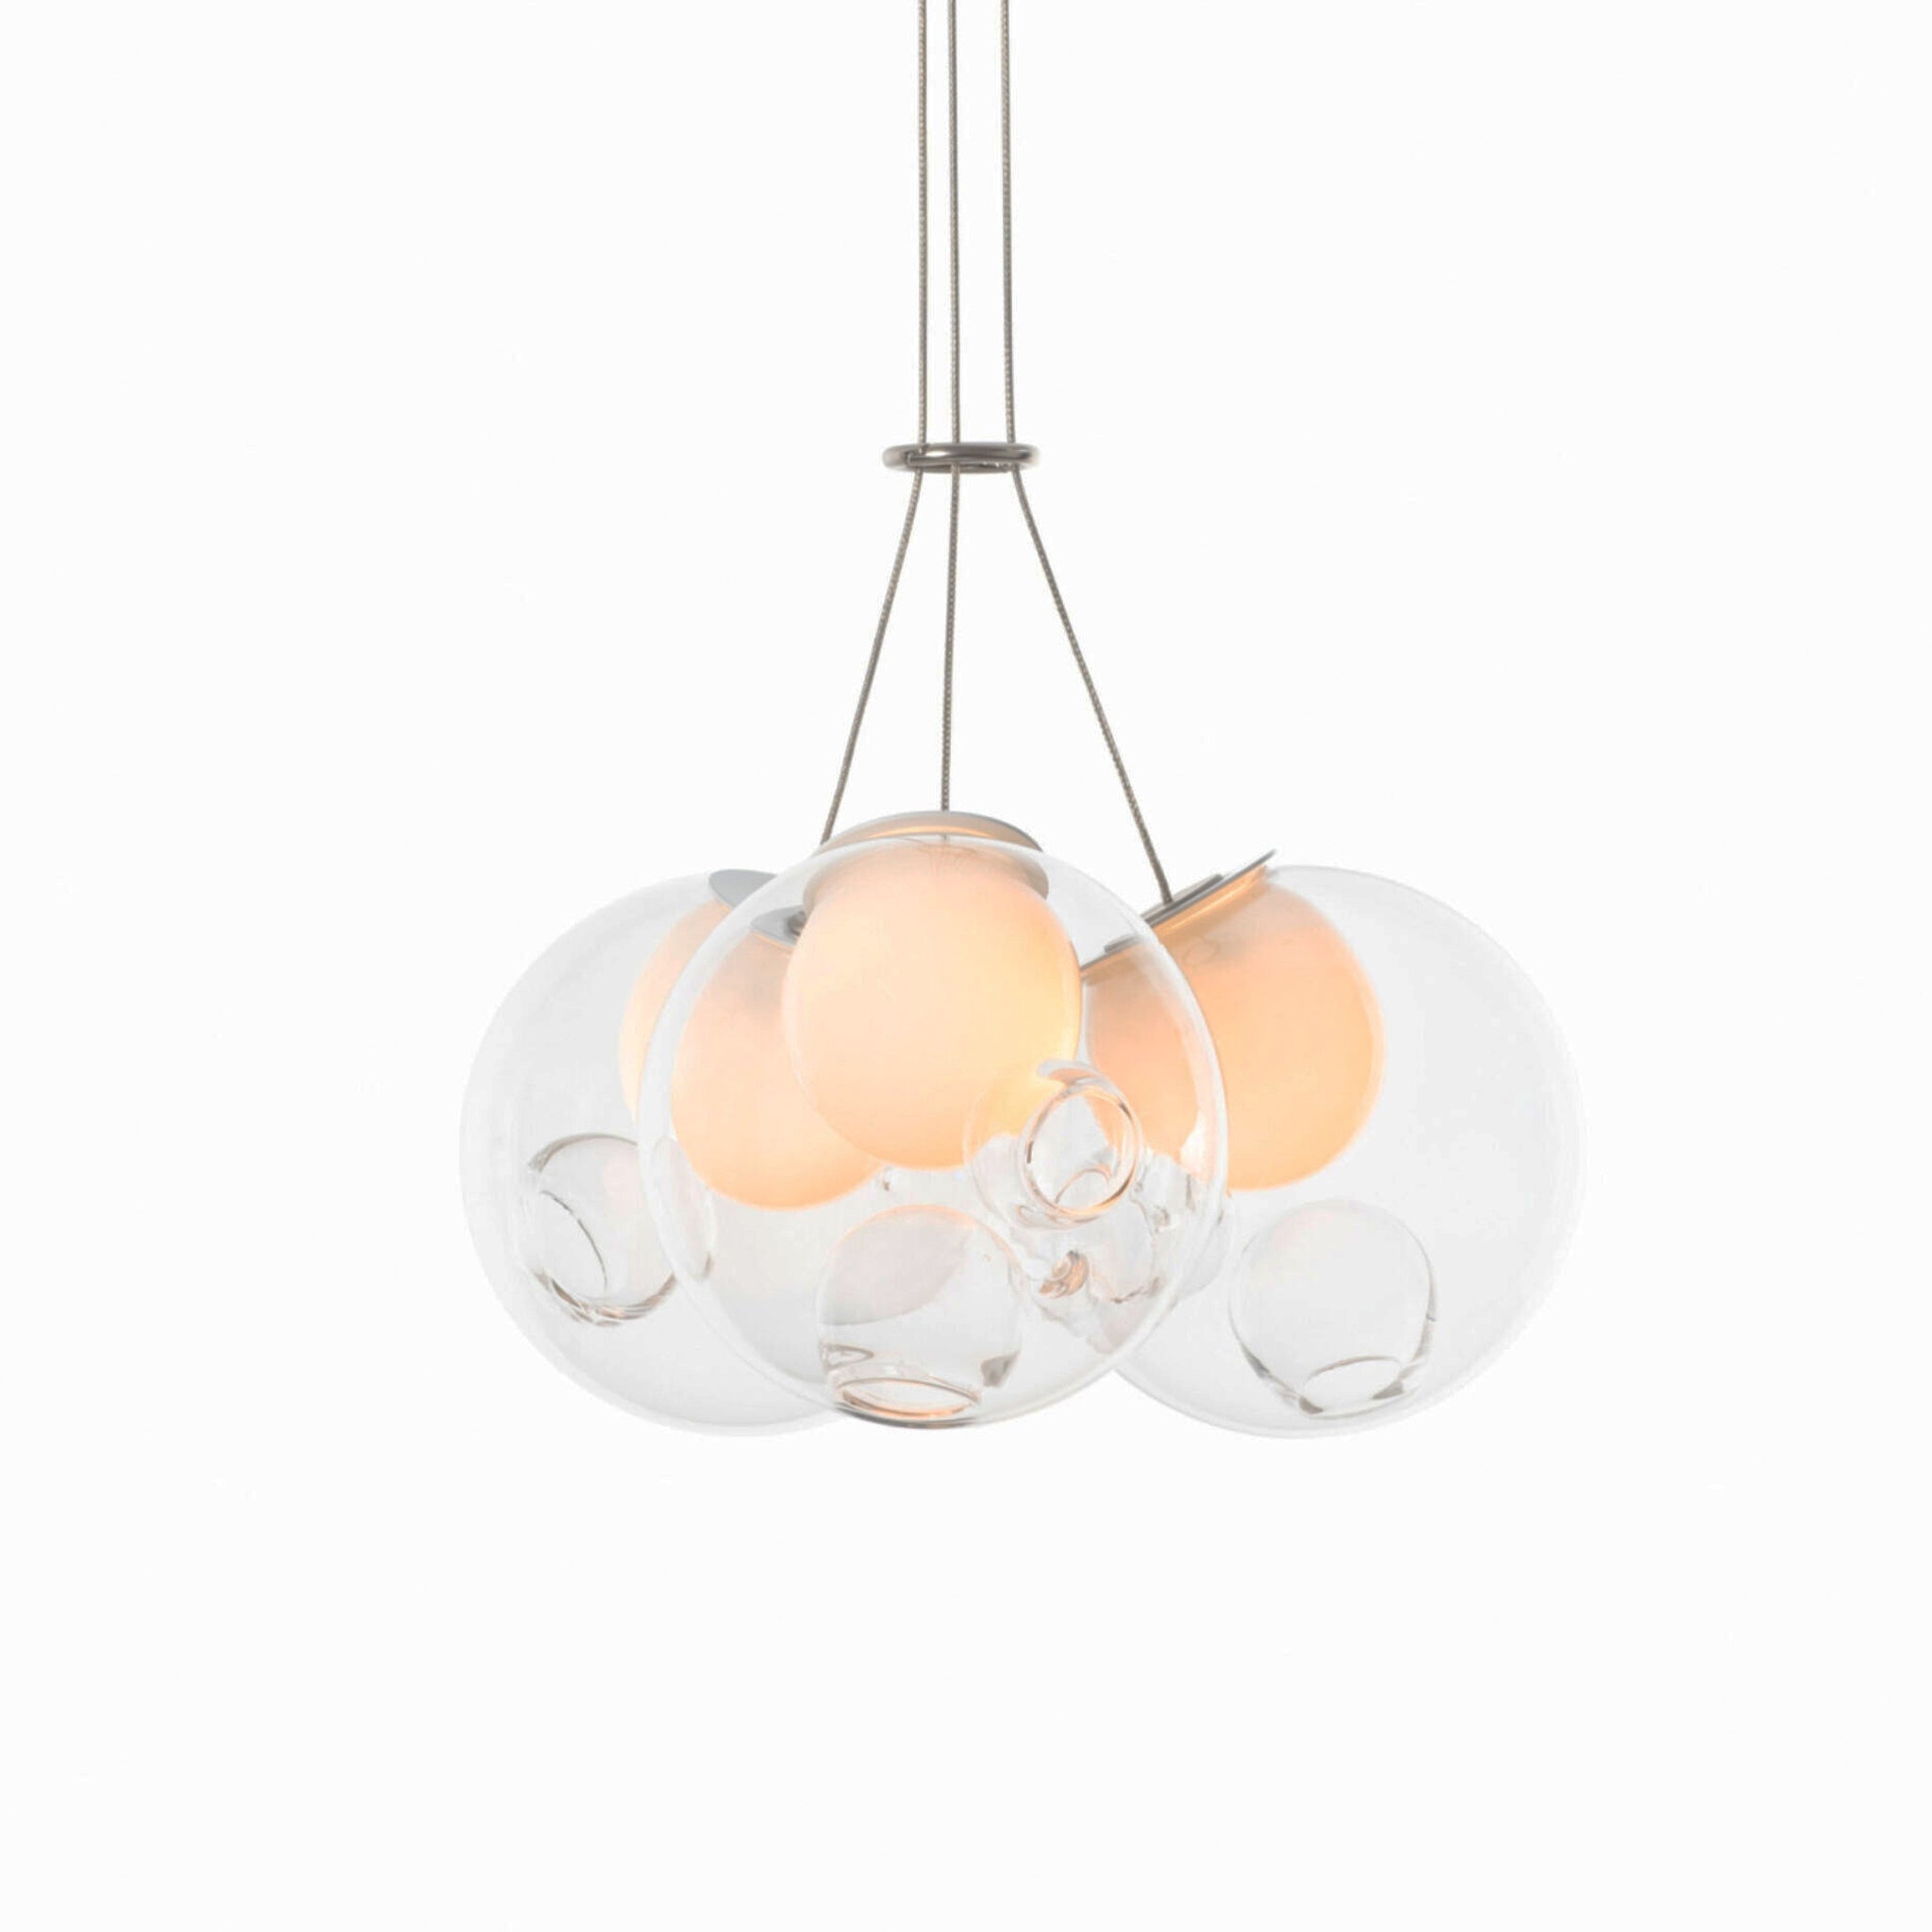 28 Cluster Pendant by Bocci